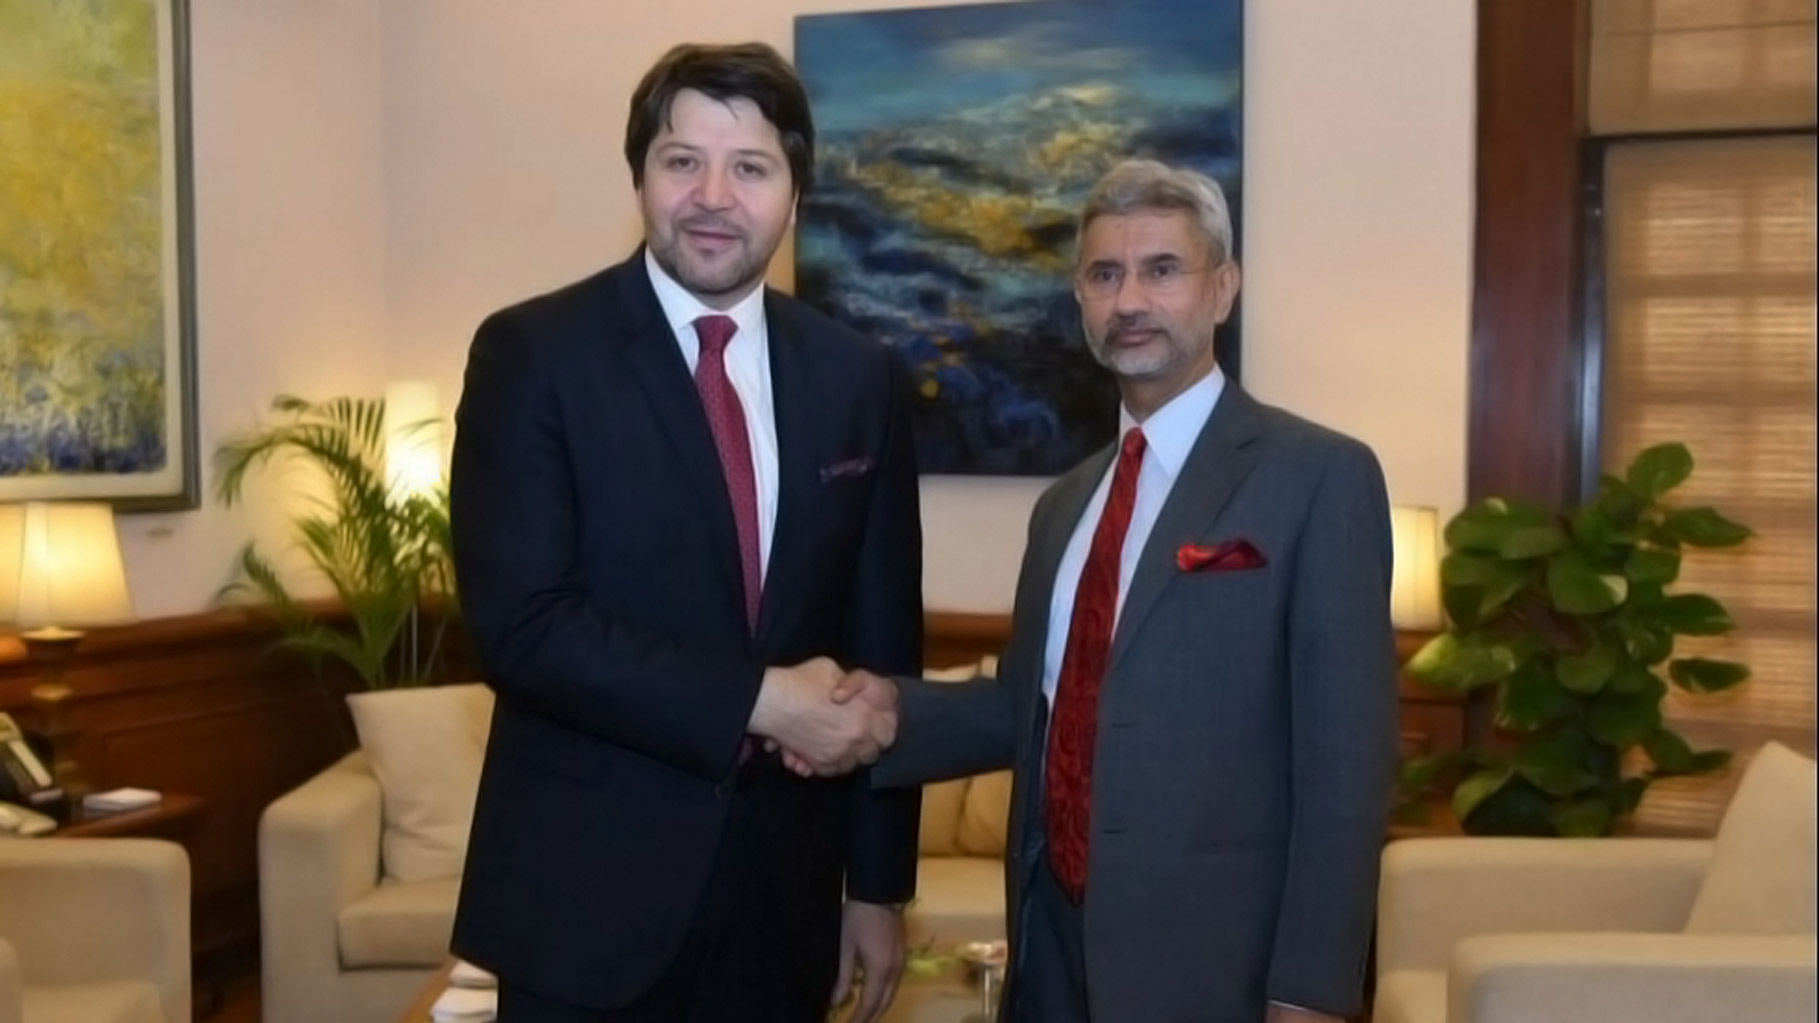 

Foreign Secretary S Jaishankar (right) meets Afghan counterpart Hekmat Karzai ahead of Heart of Asia Conference on Tuesday, 26 April 2016. ( Photo Courtesy: <a href="https://twitter.com/MEAIndia/status/724820759248523265">Twitter.com/@MEAIndia</a>) 